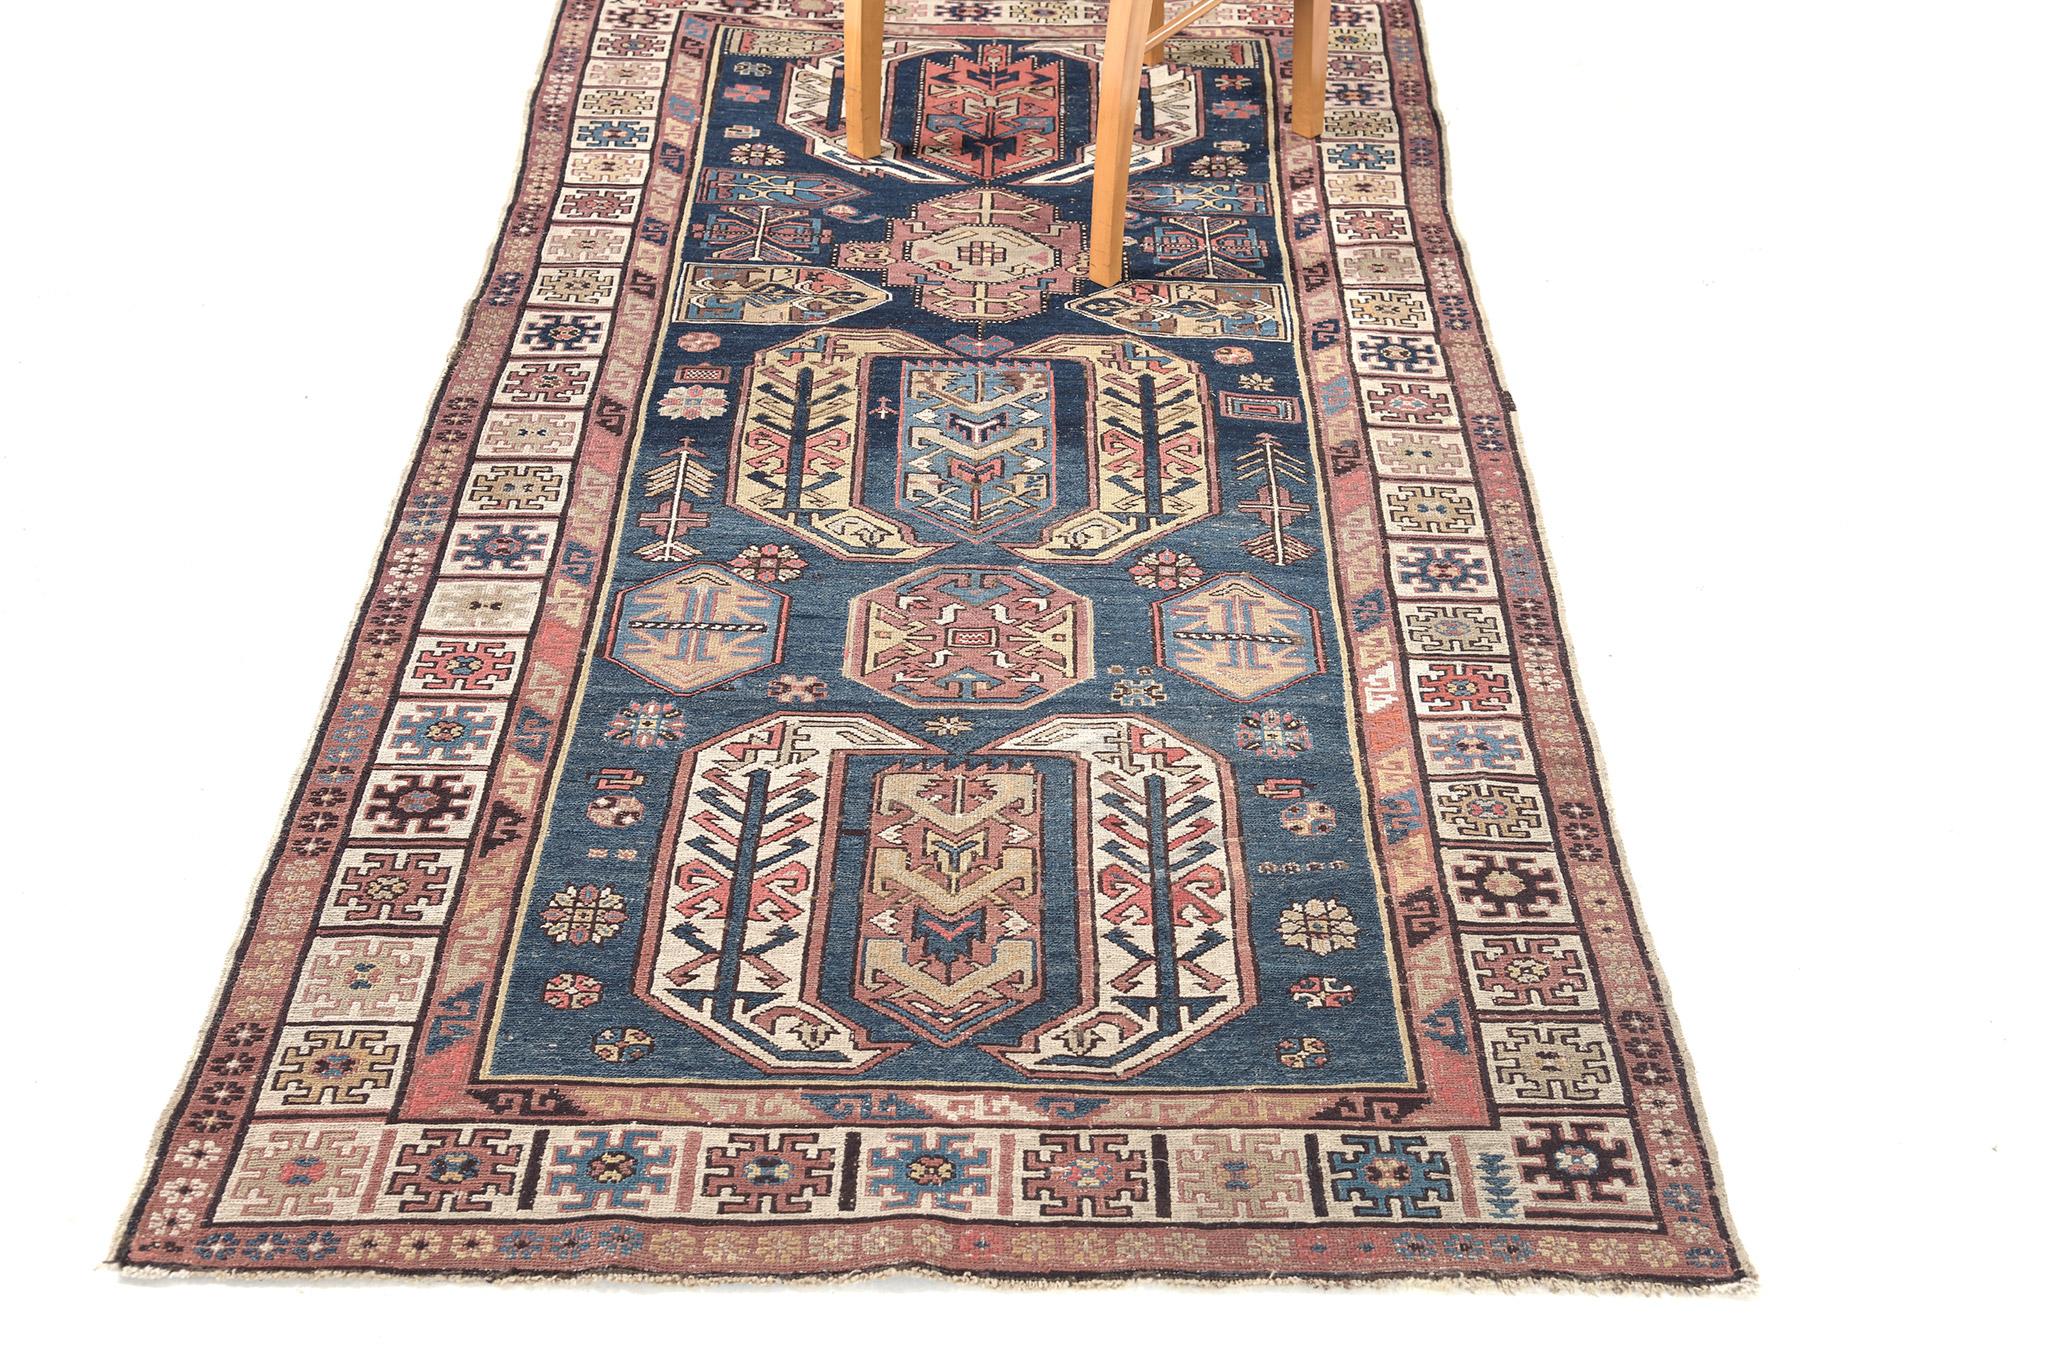 This Antique Persian Soumak features three symbollical medallions spread throughout the abrashed aegean blue field. The gorgeous color palette based around distinctive tones gives the piece a remarkable captivating feel. In combination with its bold